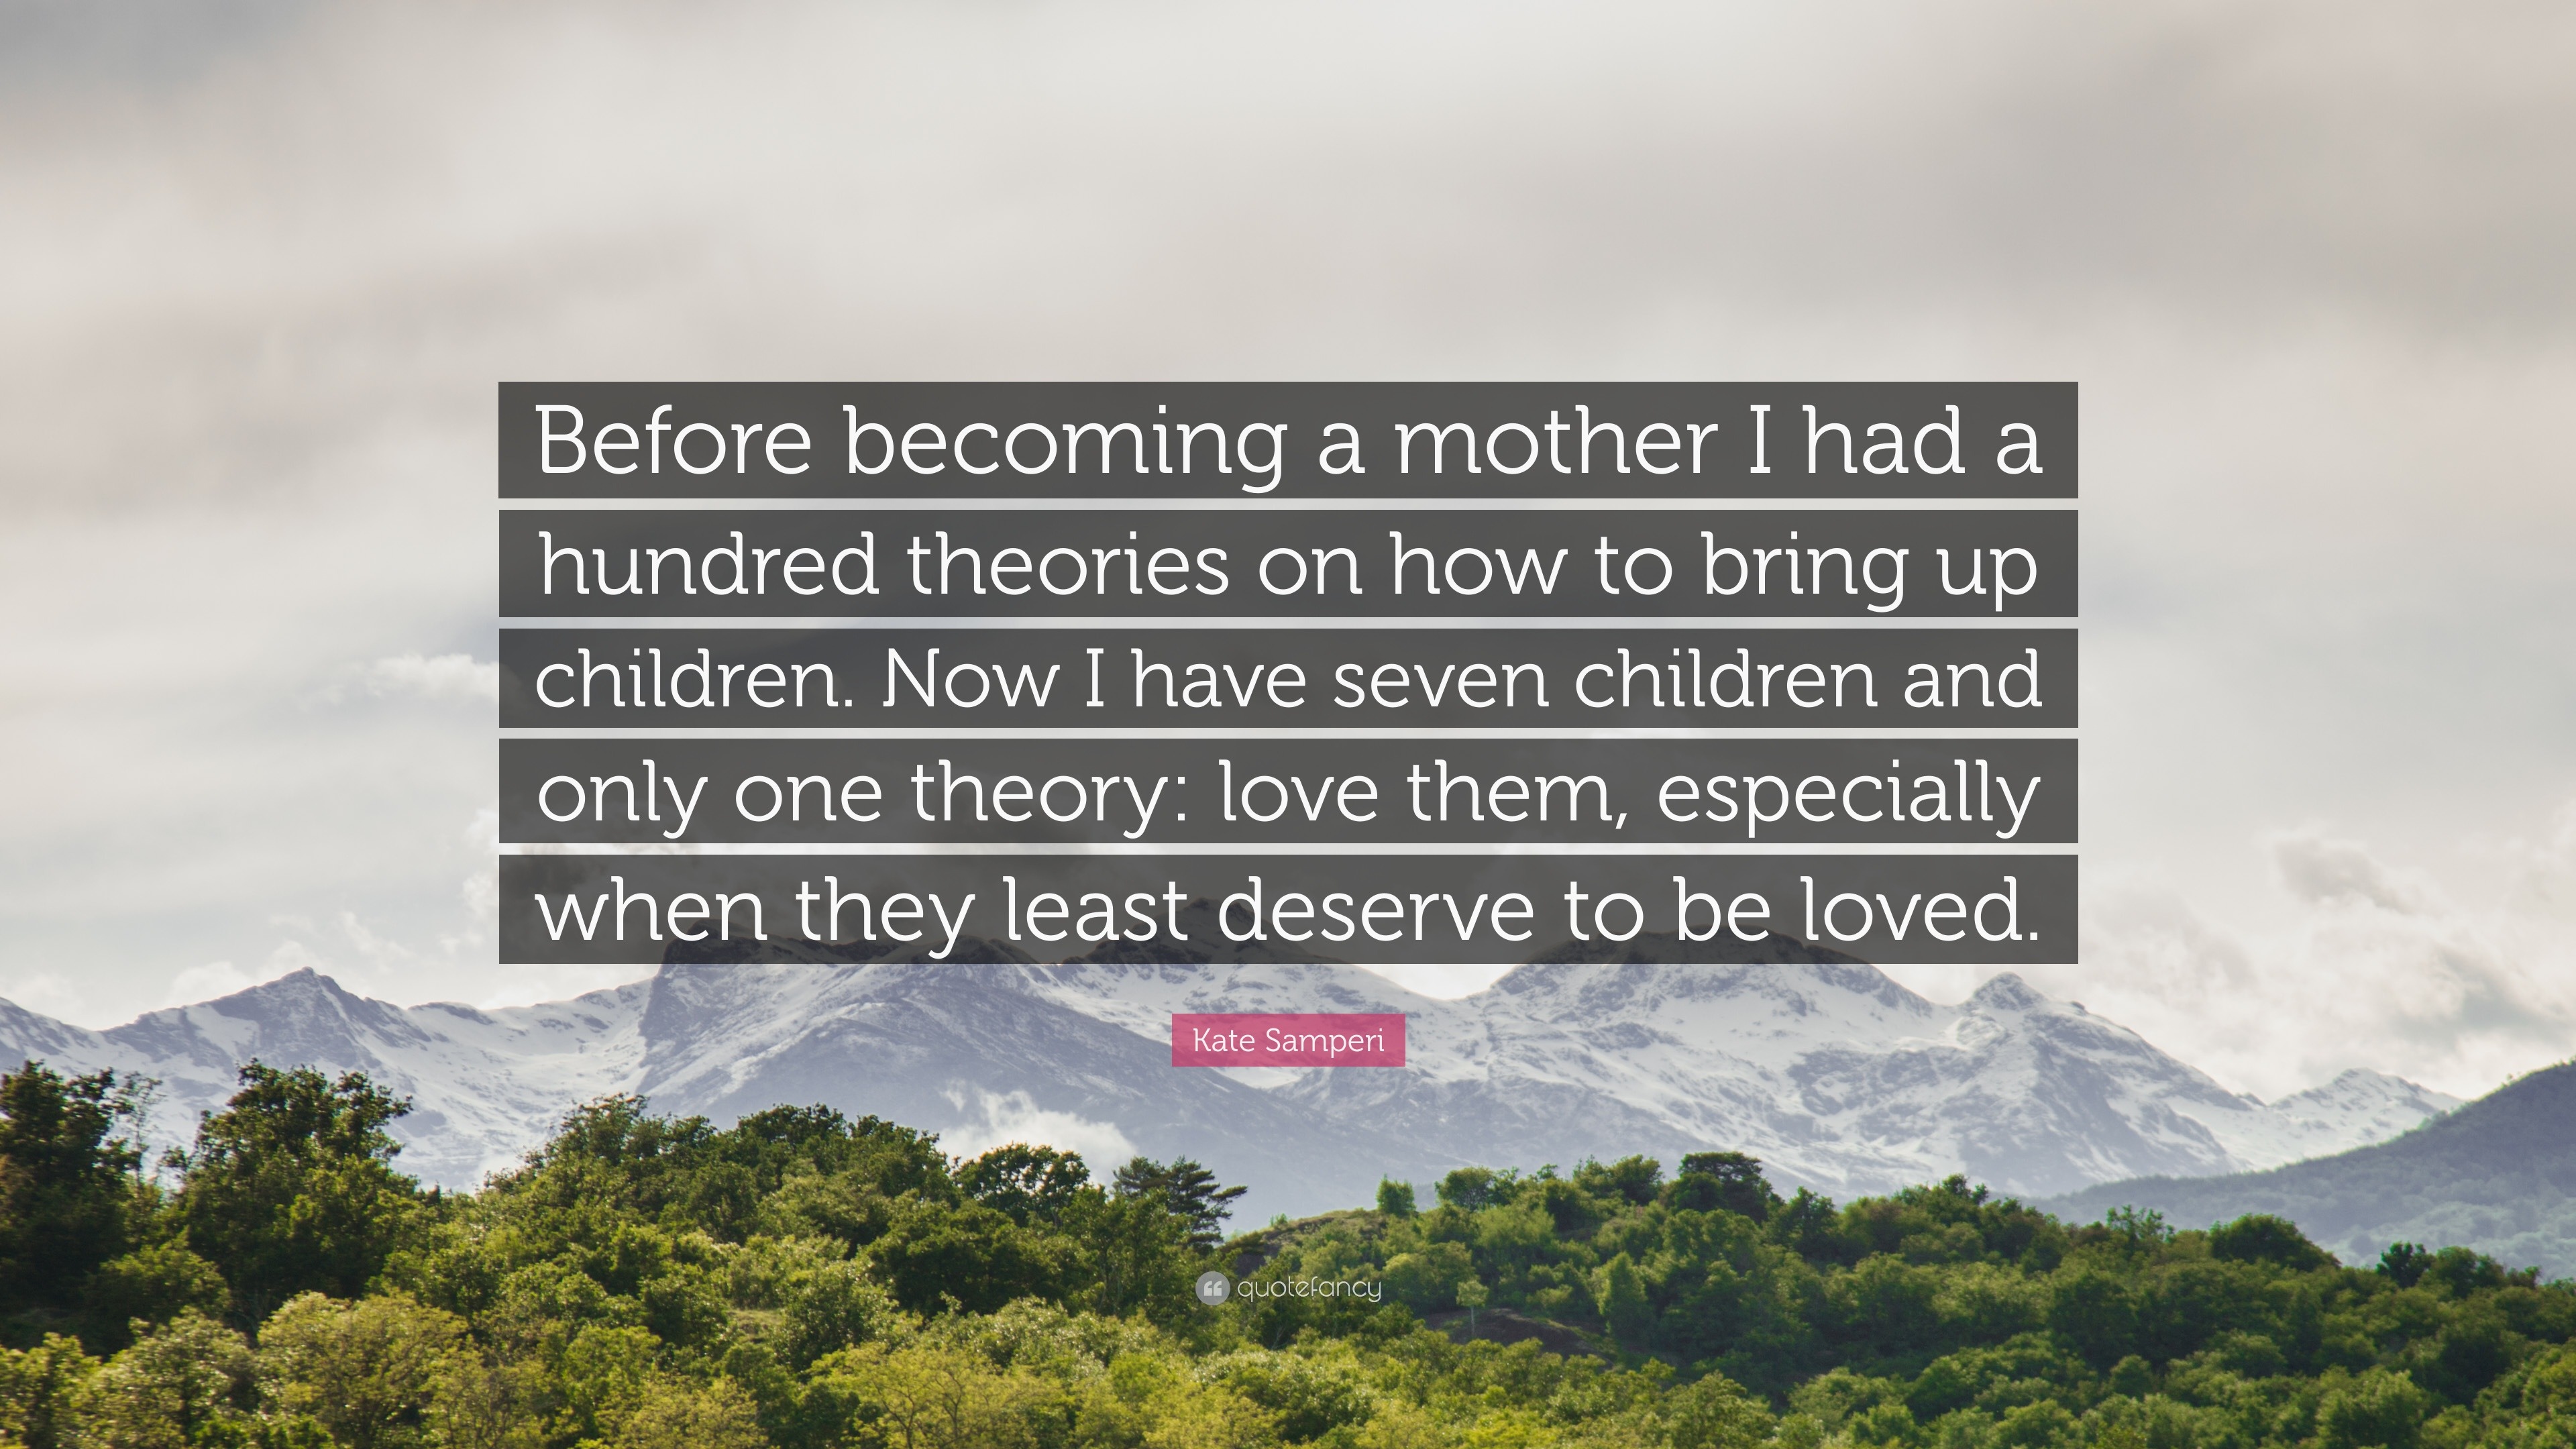 Kate Samperi Quote: “Before becoming a mother I had a hundred theories ...